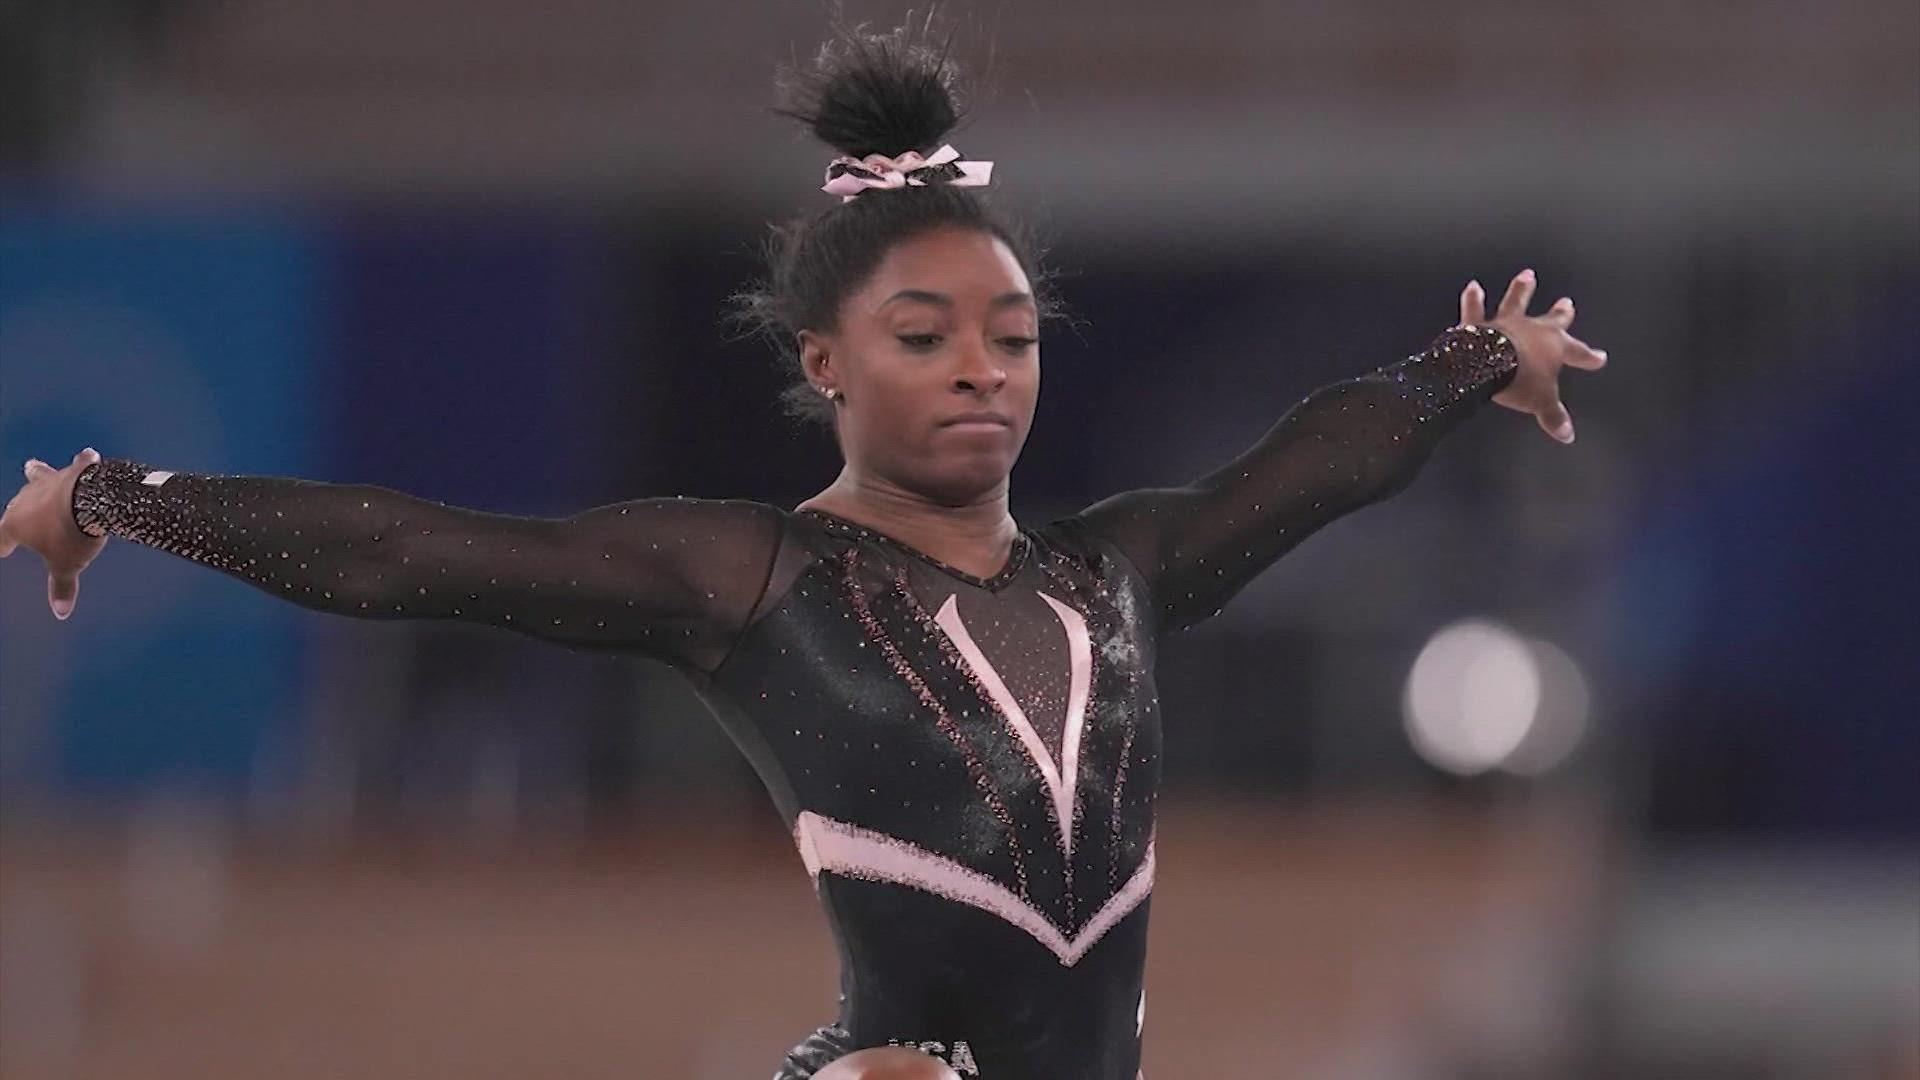 The Houston gymnast is among several people who will be honored with a Presidential Medal of Freedom. We've got the full list of nominees.